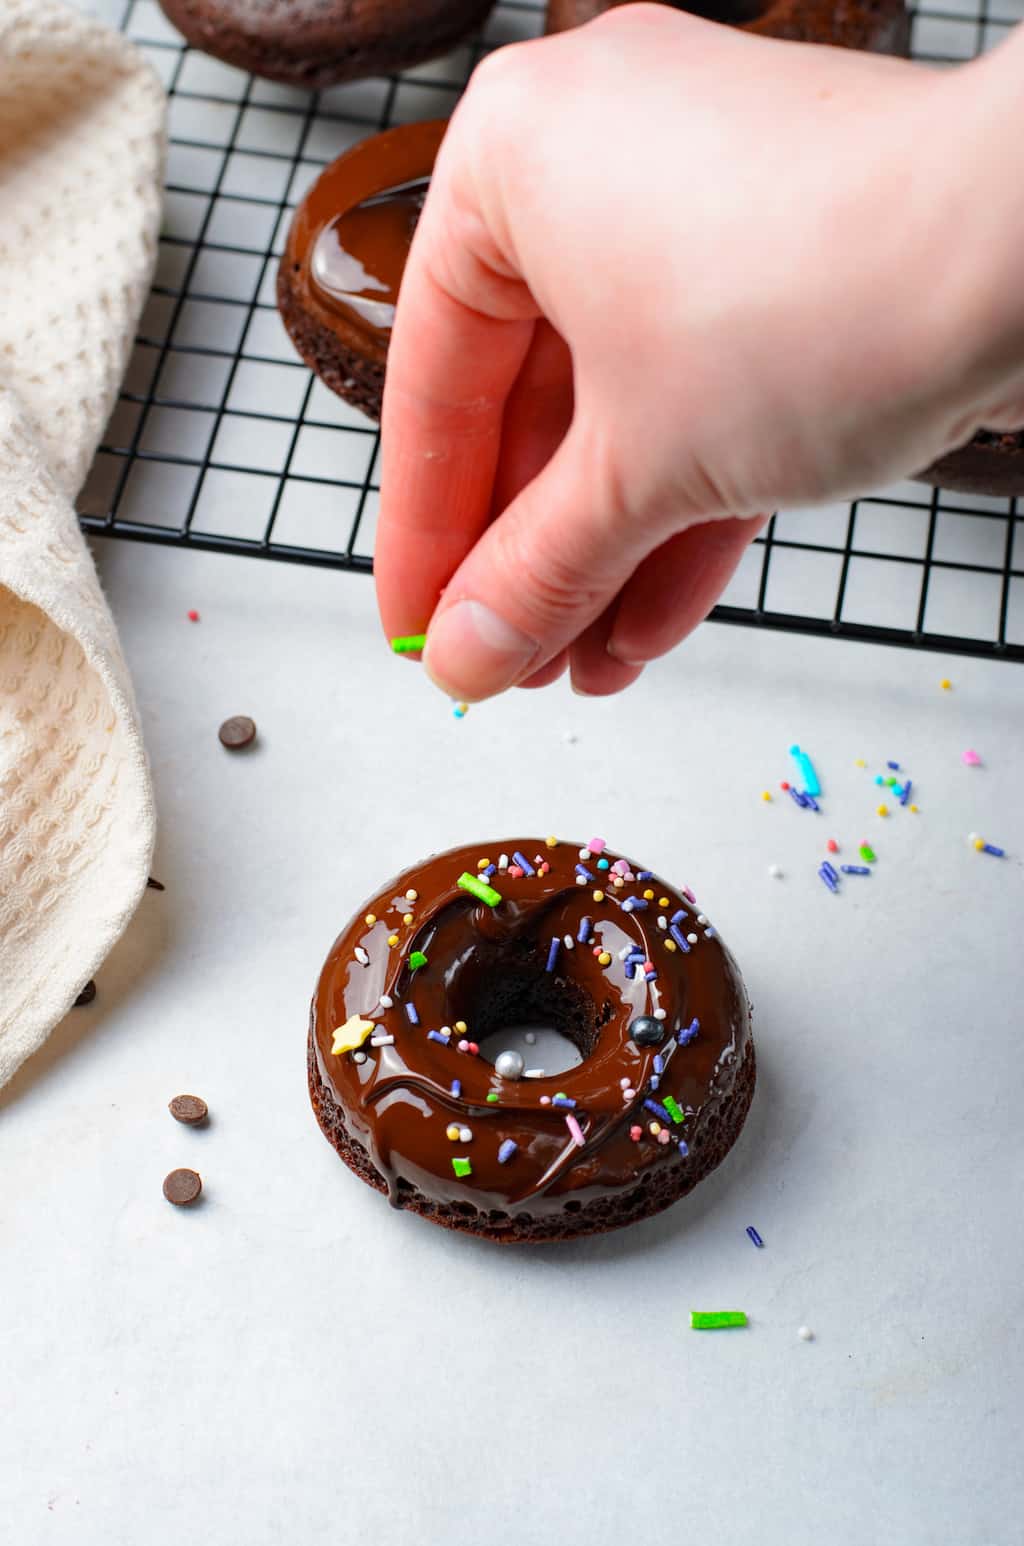 garnish the double chocolate donut with sprinkles